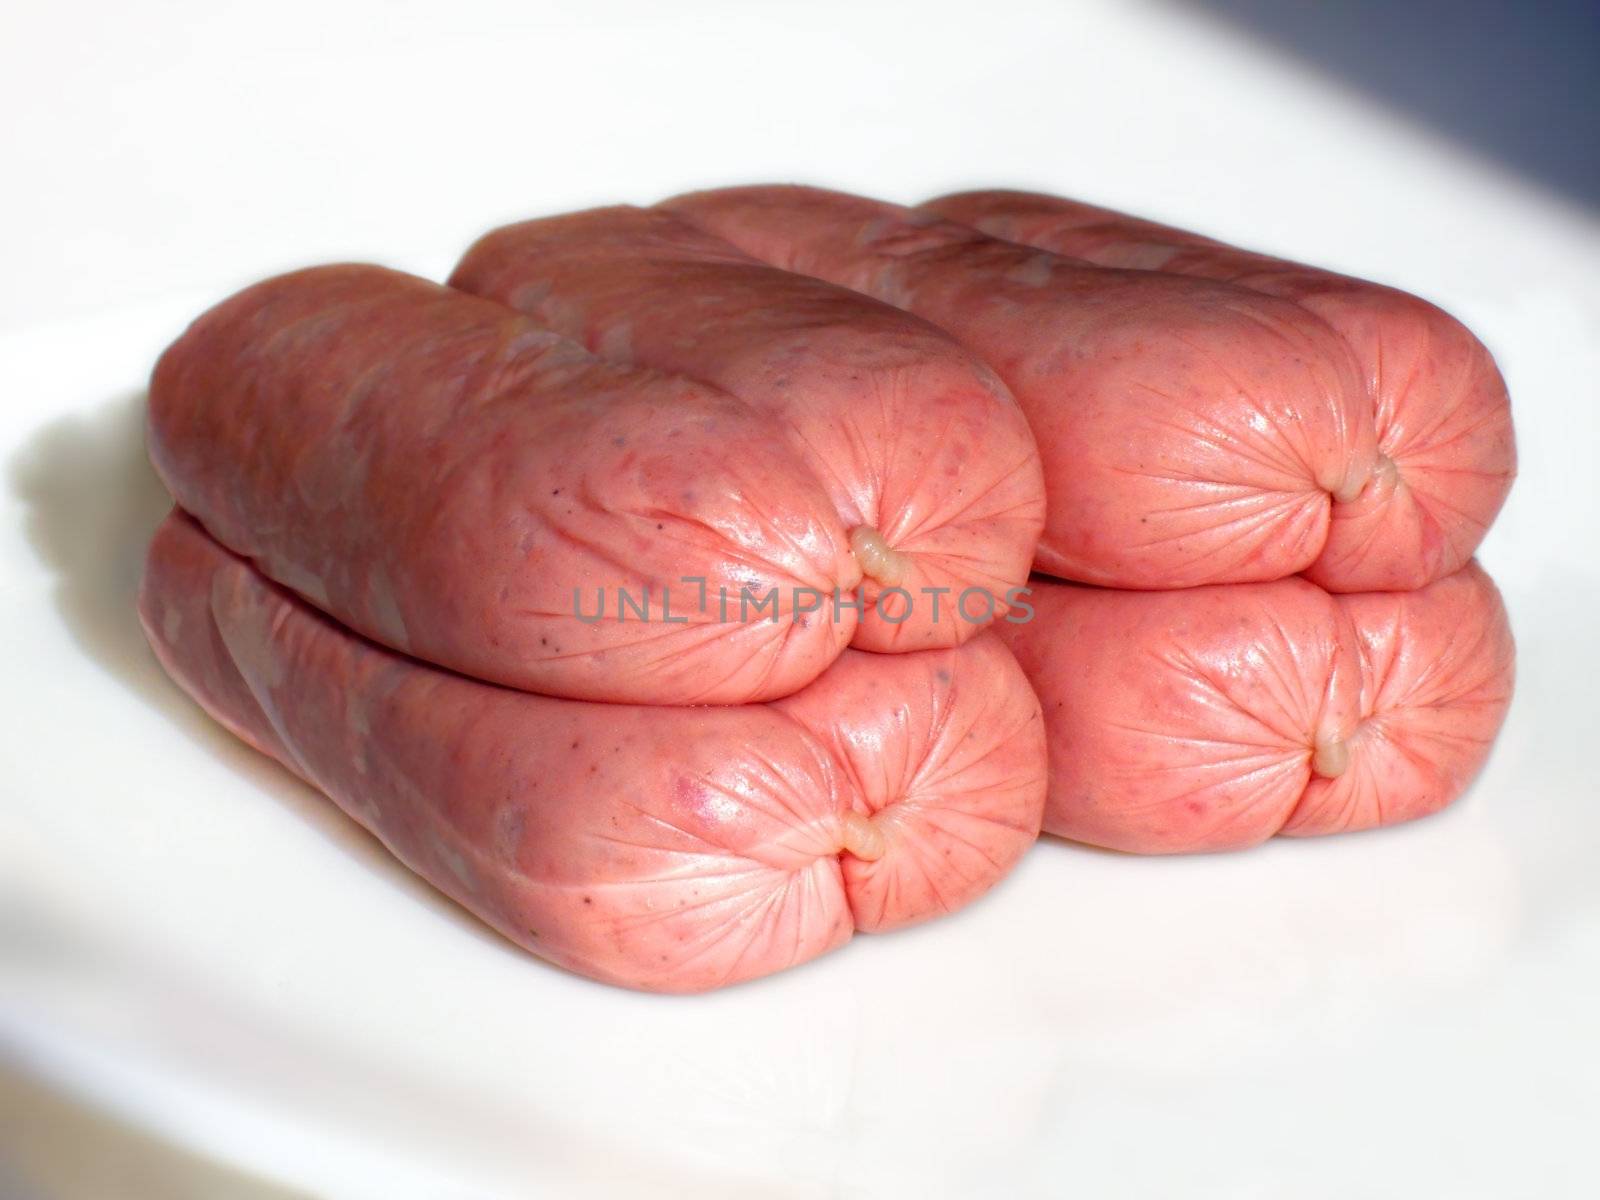 Eight uncooked linked sausages on a plate